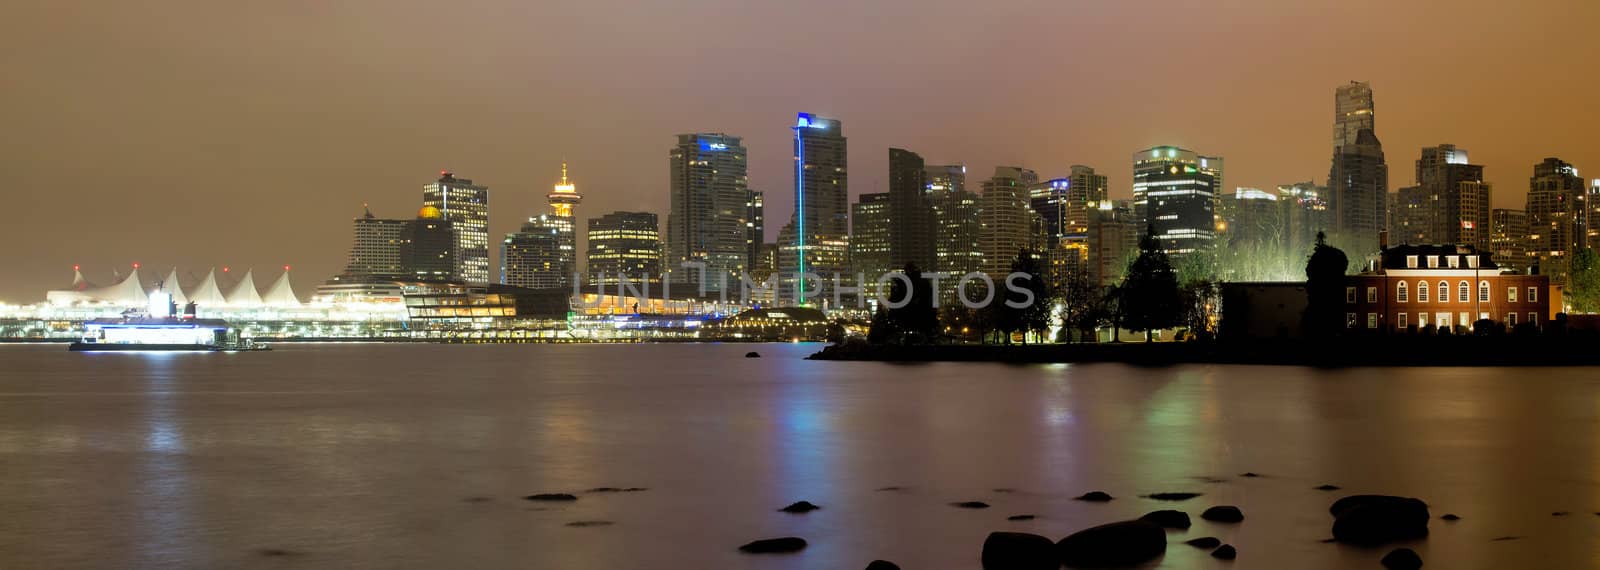 Vancouver BC City Skyline at Night by Davidgn